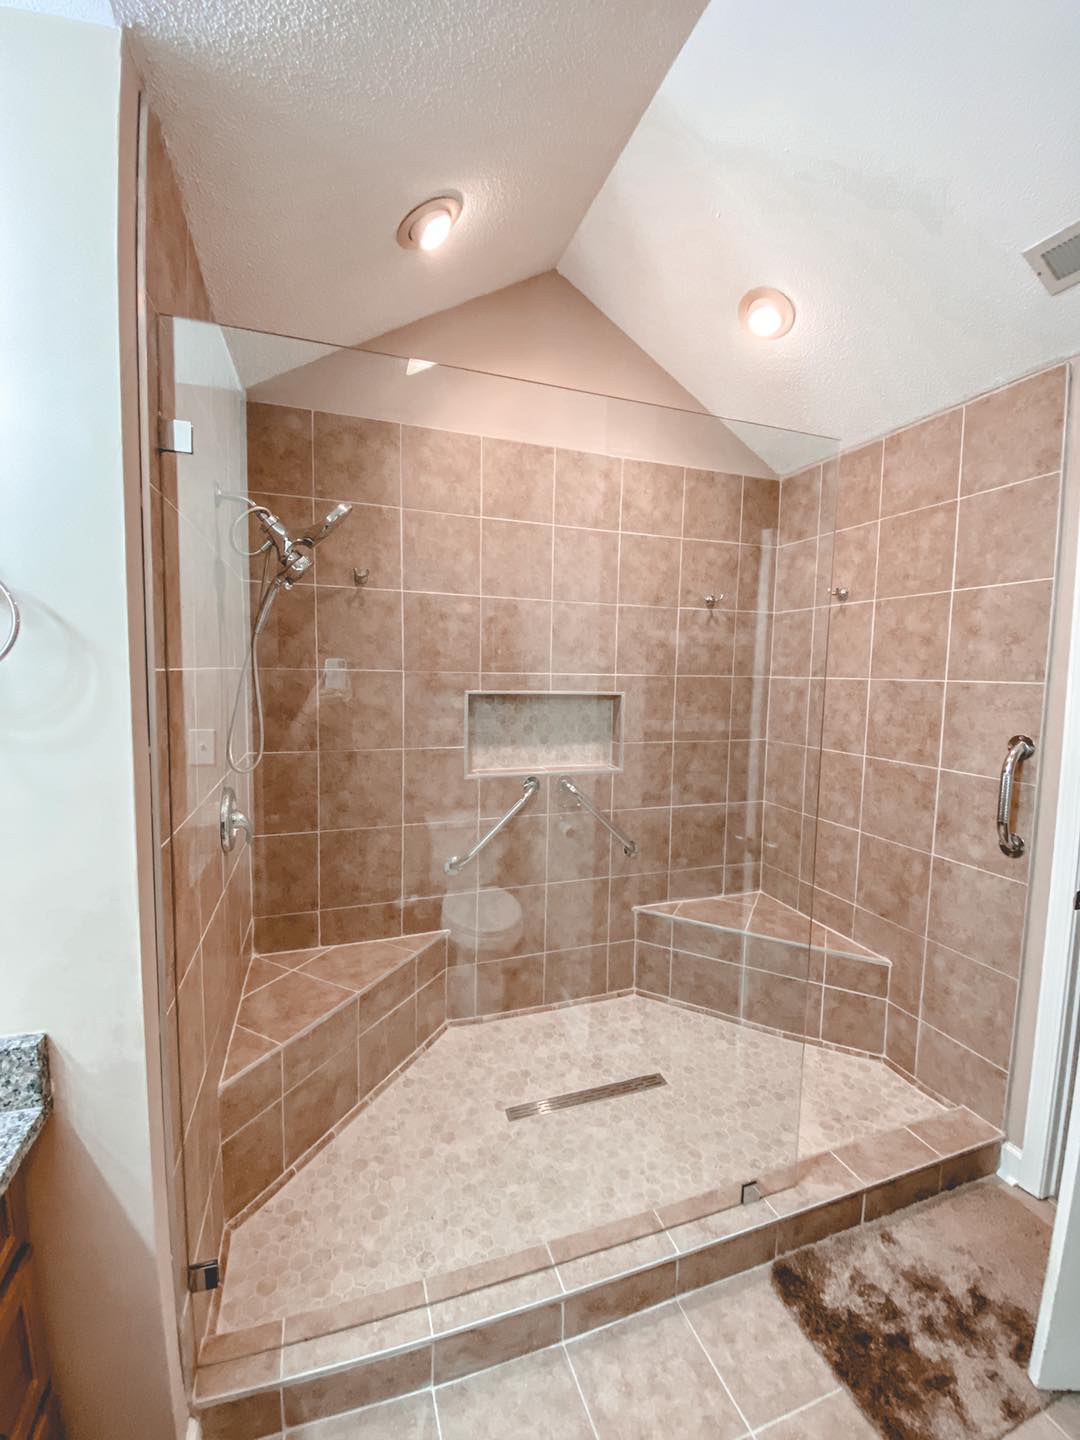 Shower remodel done by The Honey Do Service